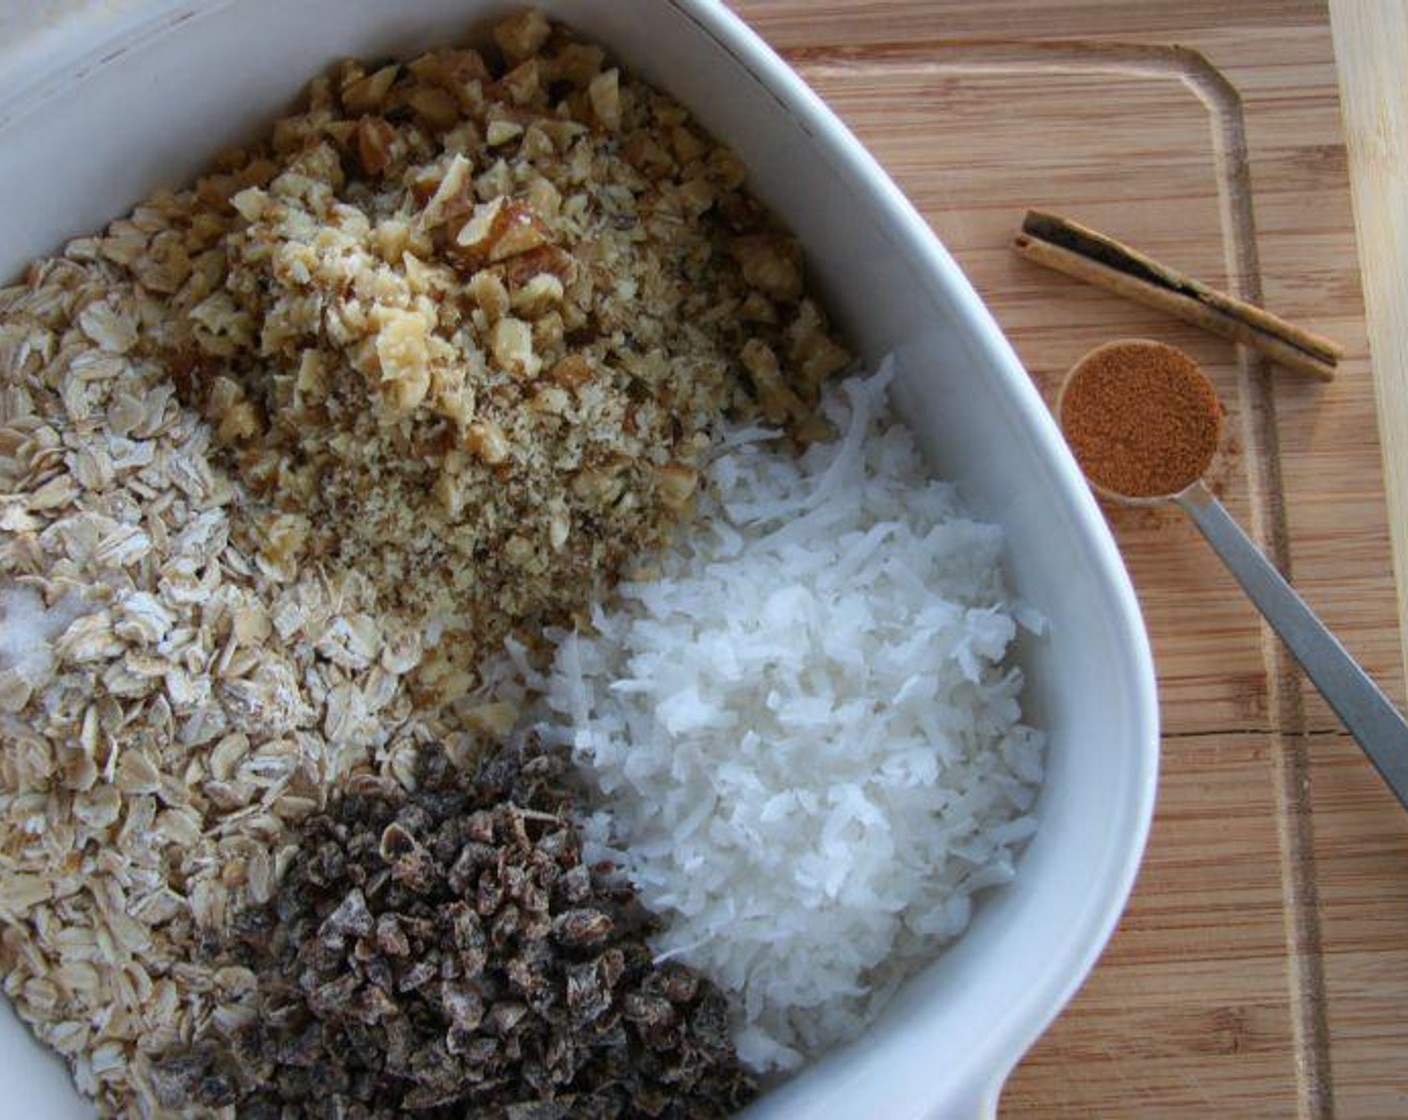 step 2 Combine Oats (2 cups), Chopped Nuts (1 cup), Unsweetened Shredded Coconut (1 cup), Dried Fruits (1 cup), Ground Cinnamon (1 tsp), and Salt (1/4 tsp) in a large bowl.